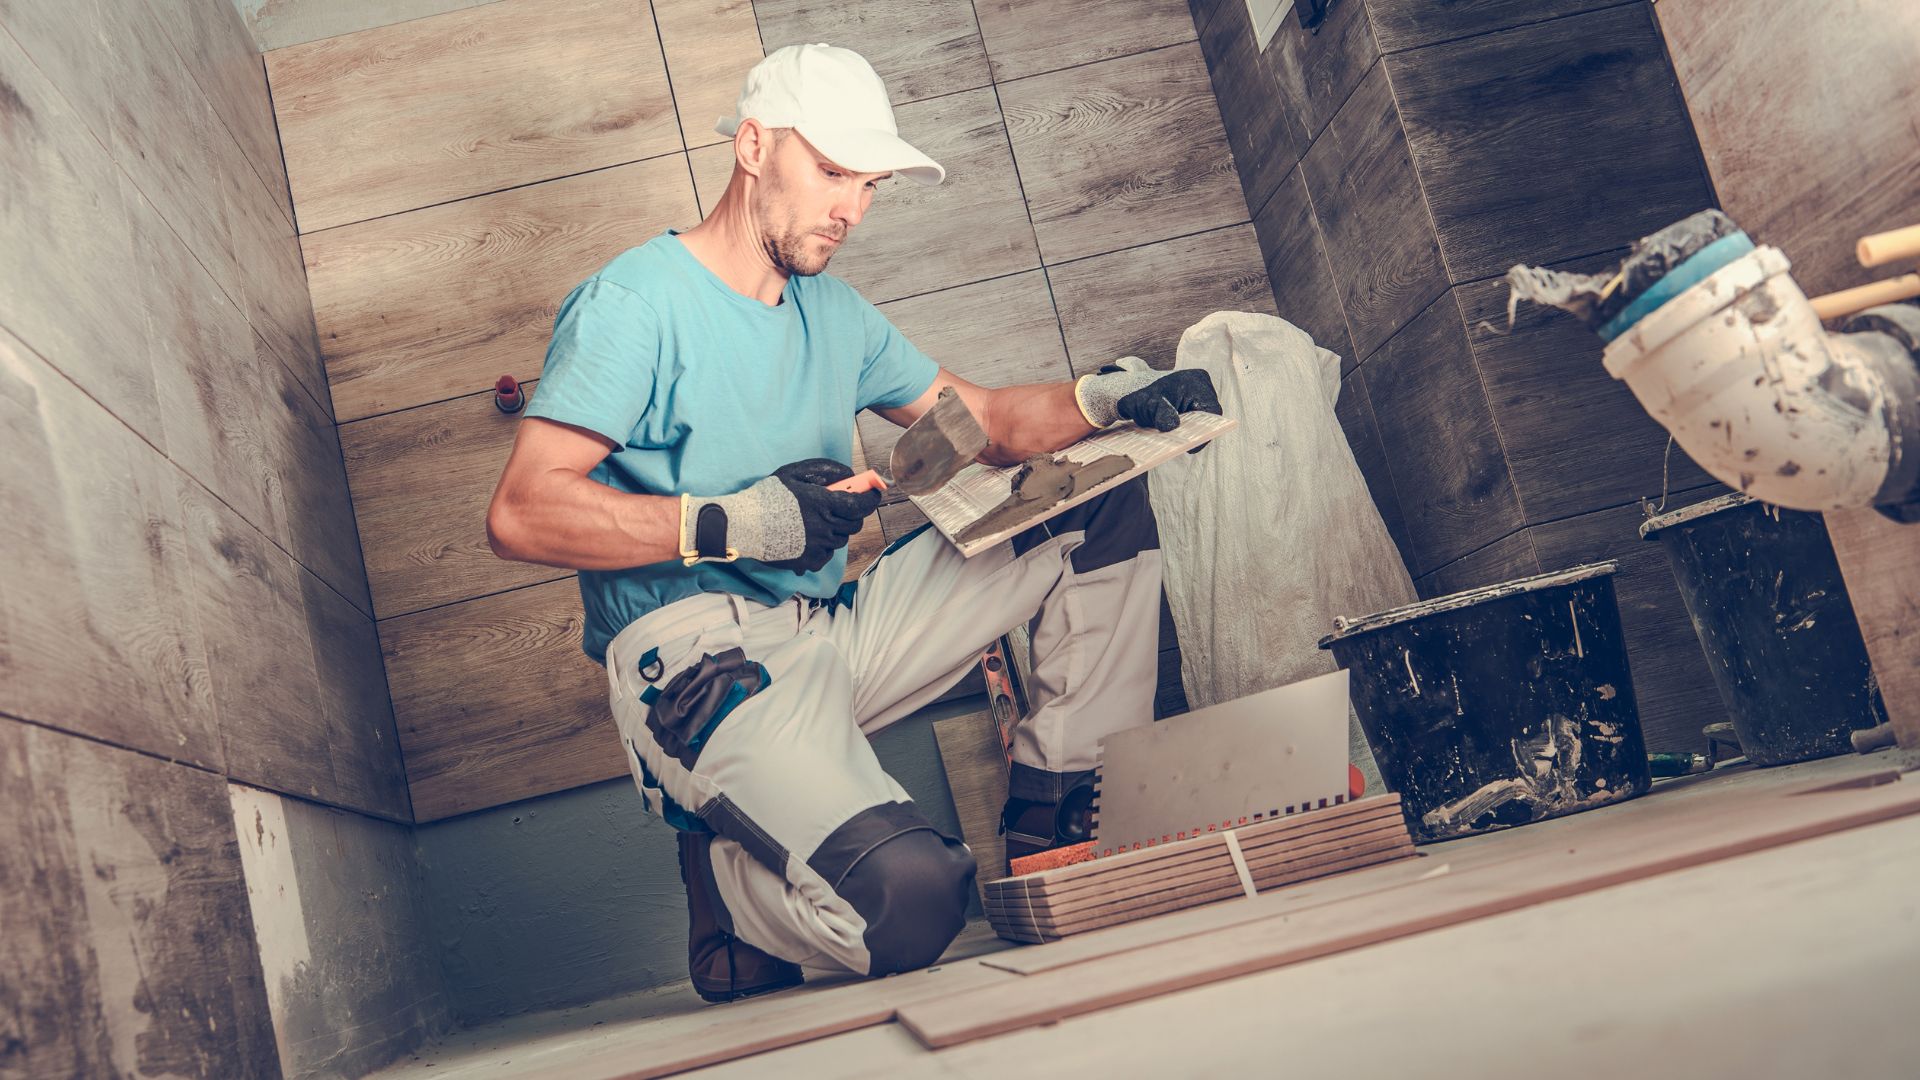 A worker kneels in the middle of floor, surrounded by his tools, working on a bathroom remodel.